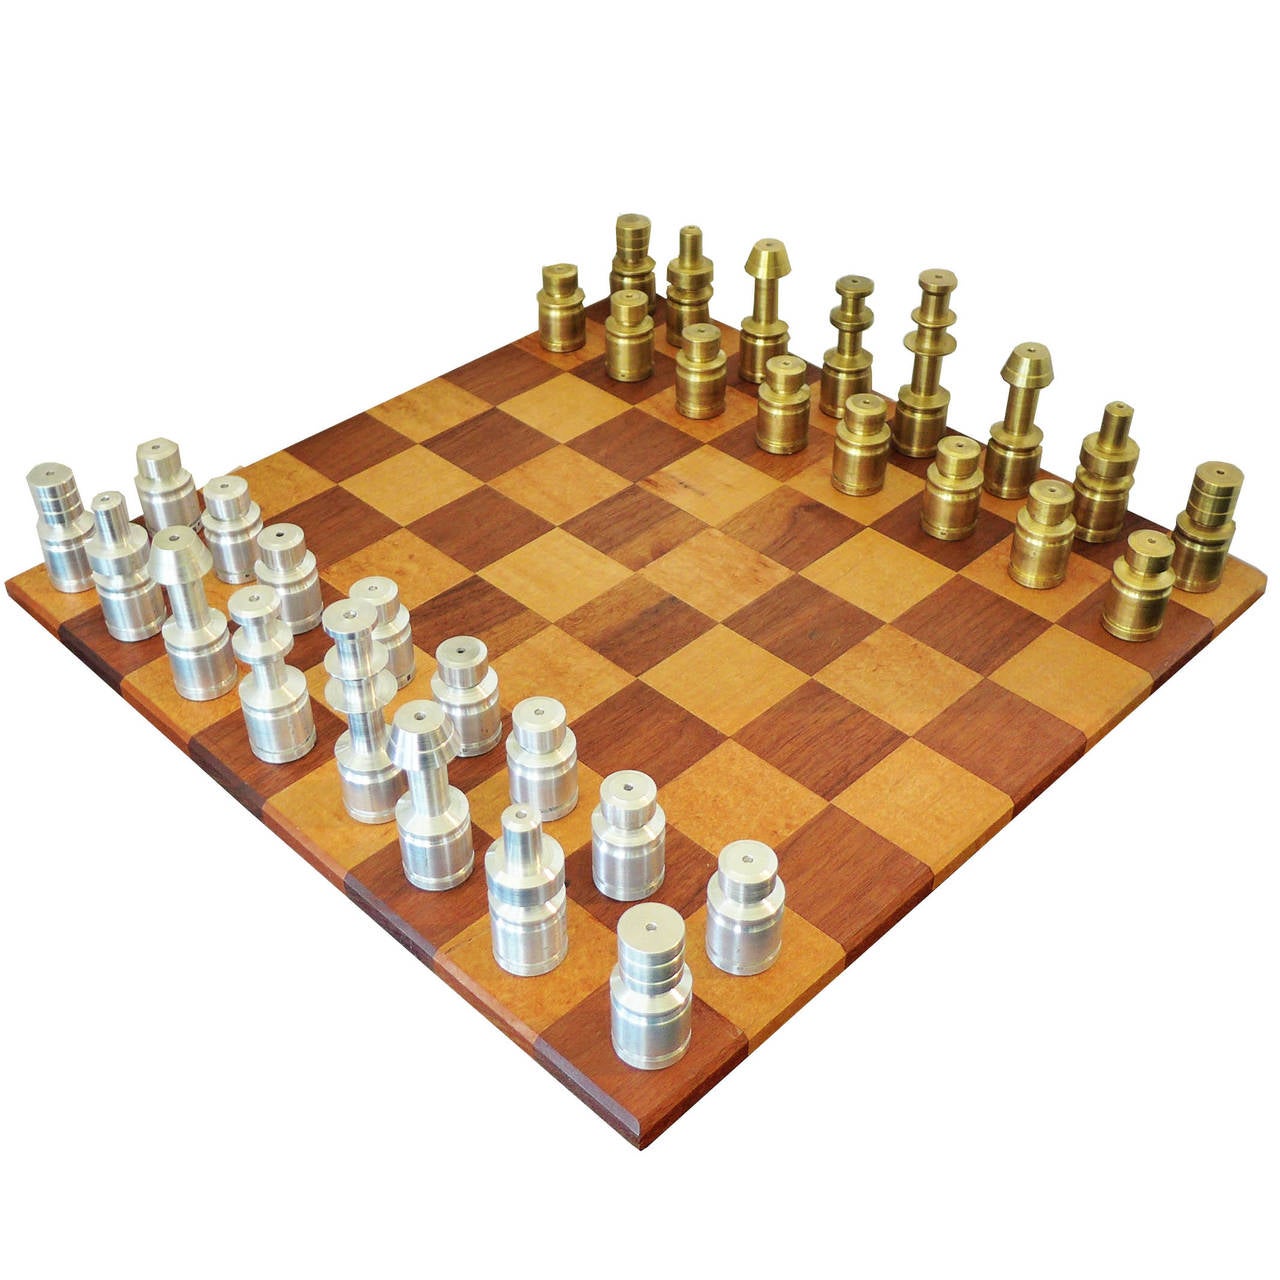 These machine age chessmen were made of solid aluminum and solid brass. They have a great minimalist design with strong detail.